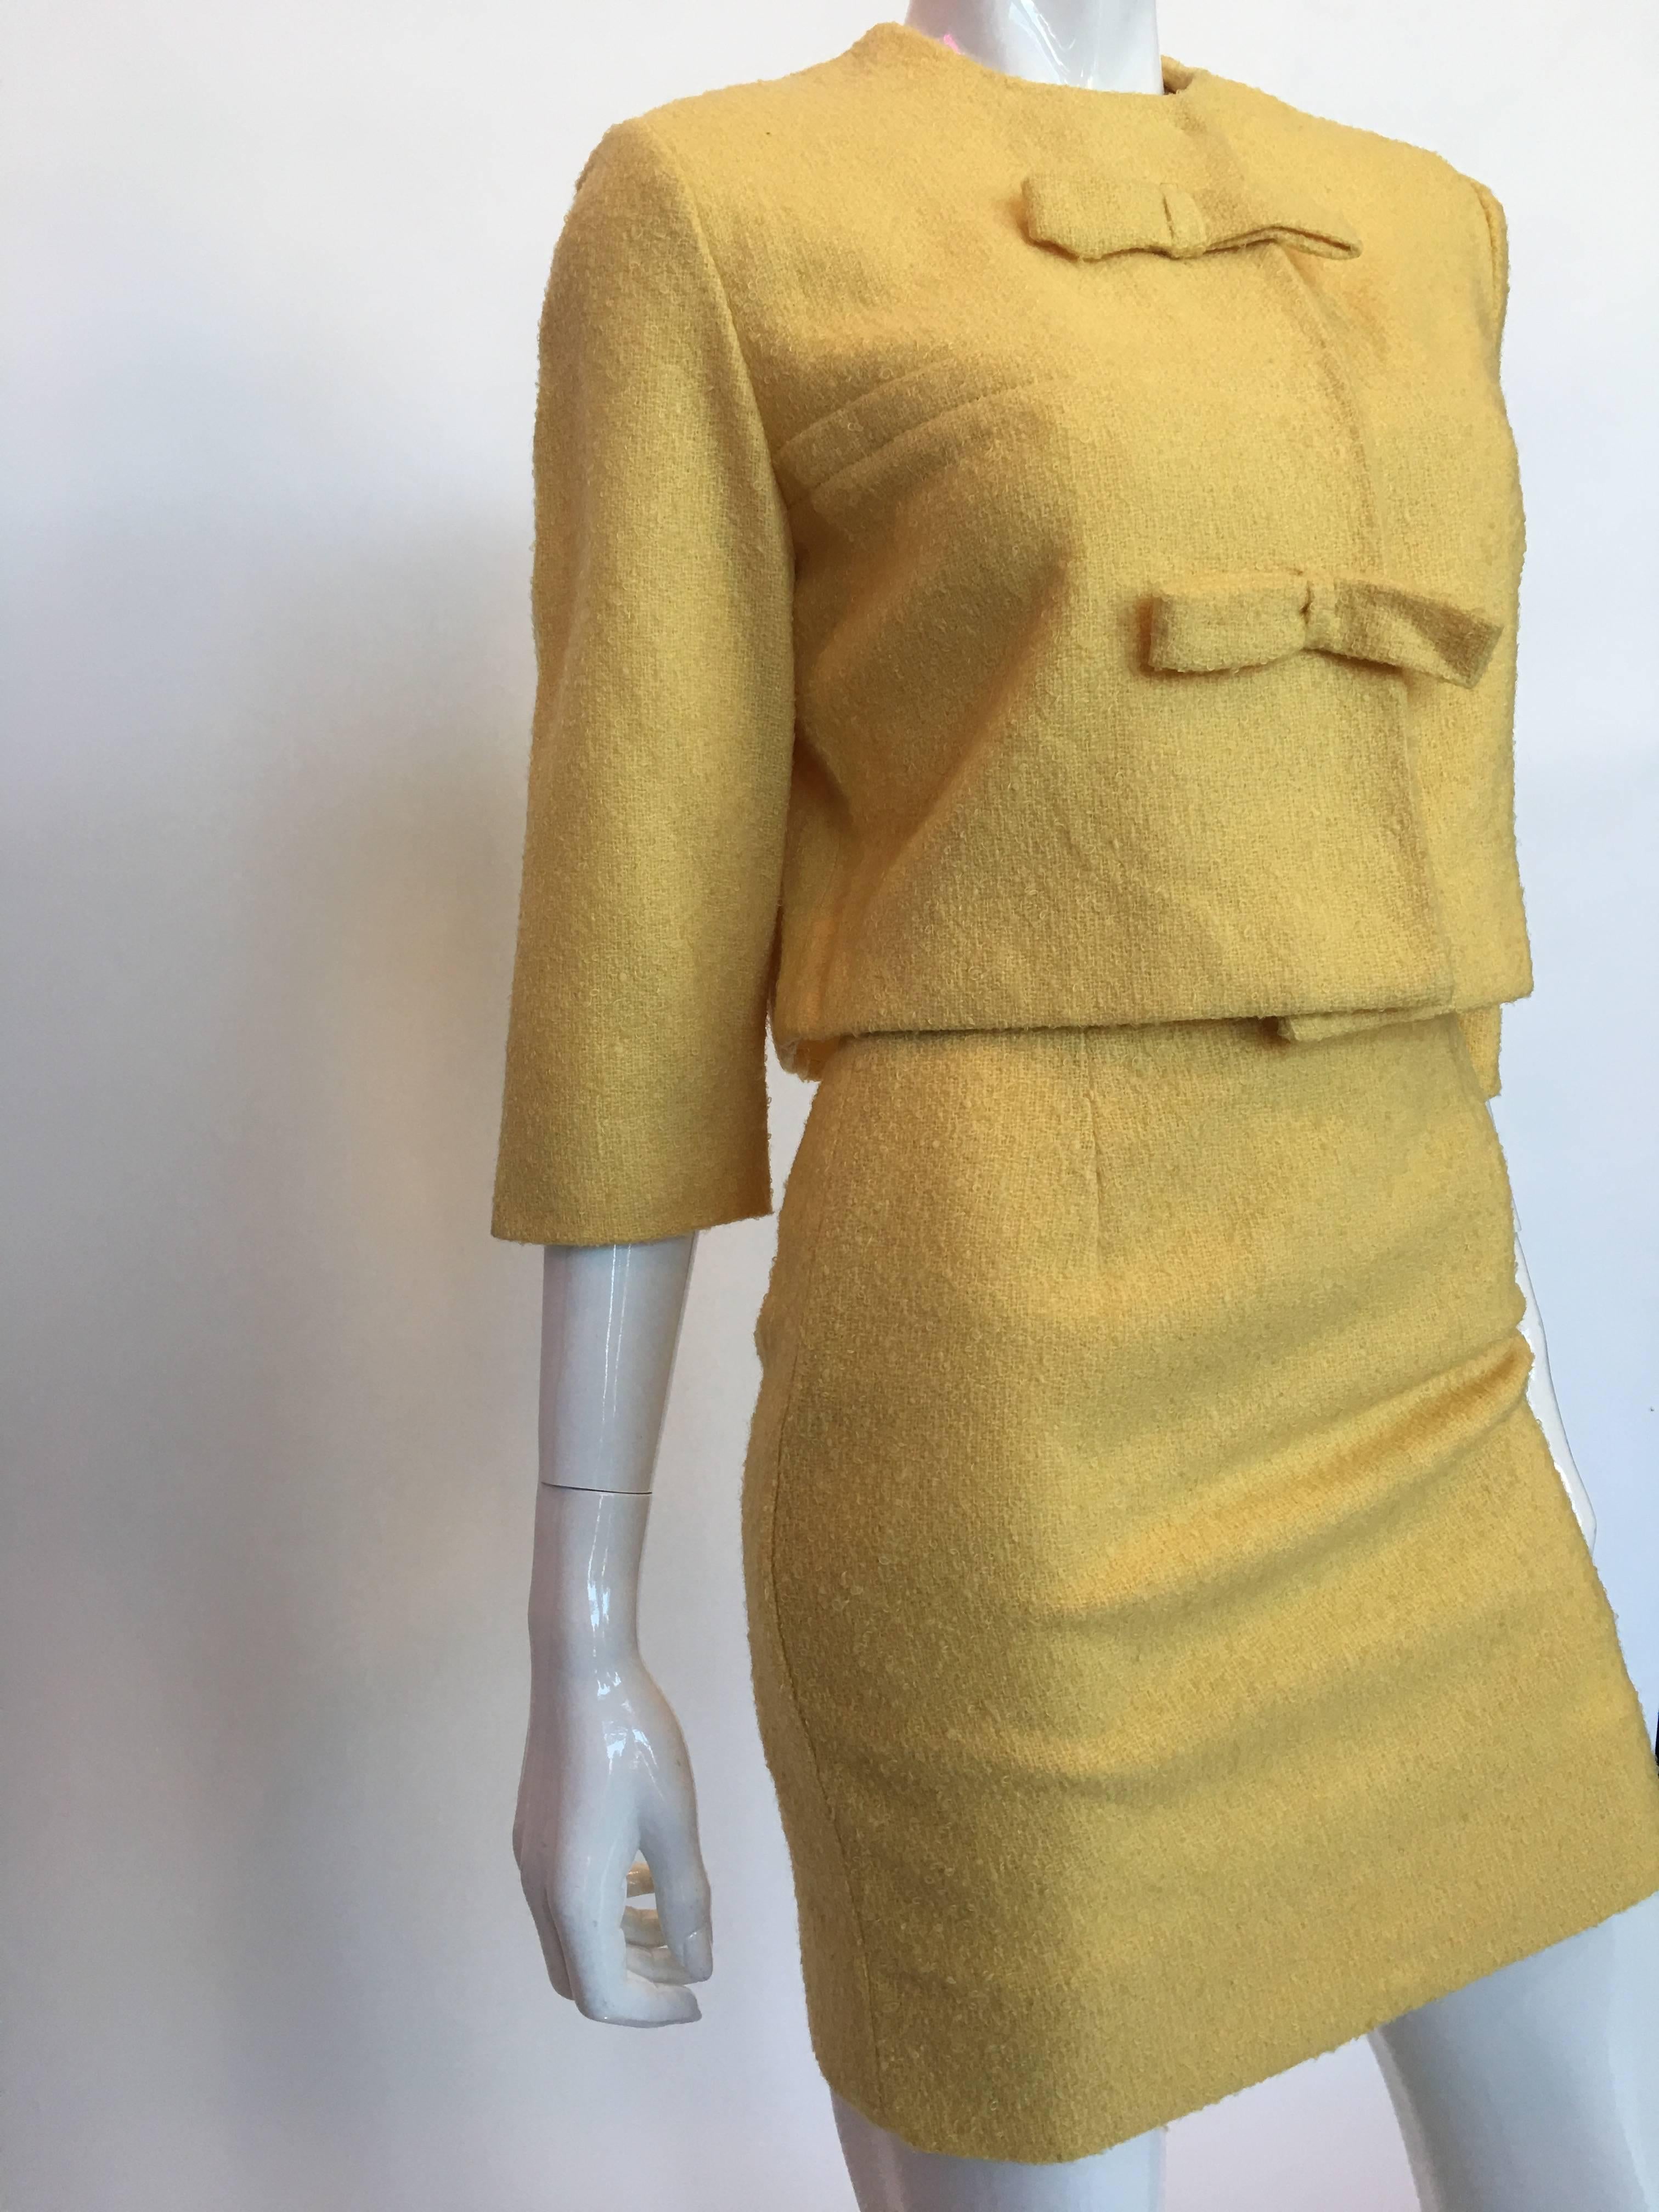 Women's or Men's 1960s Jackie O Mod Style Butter Yellow Knubby Knit 2 Piece Skirt Suit For Sale